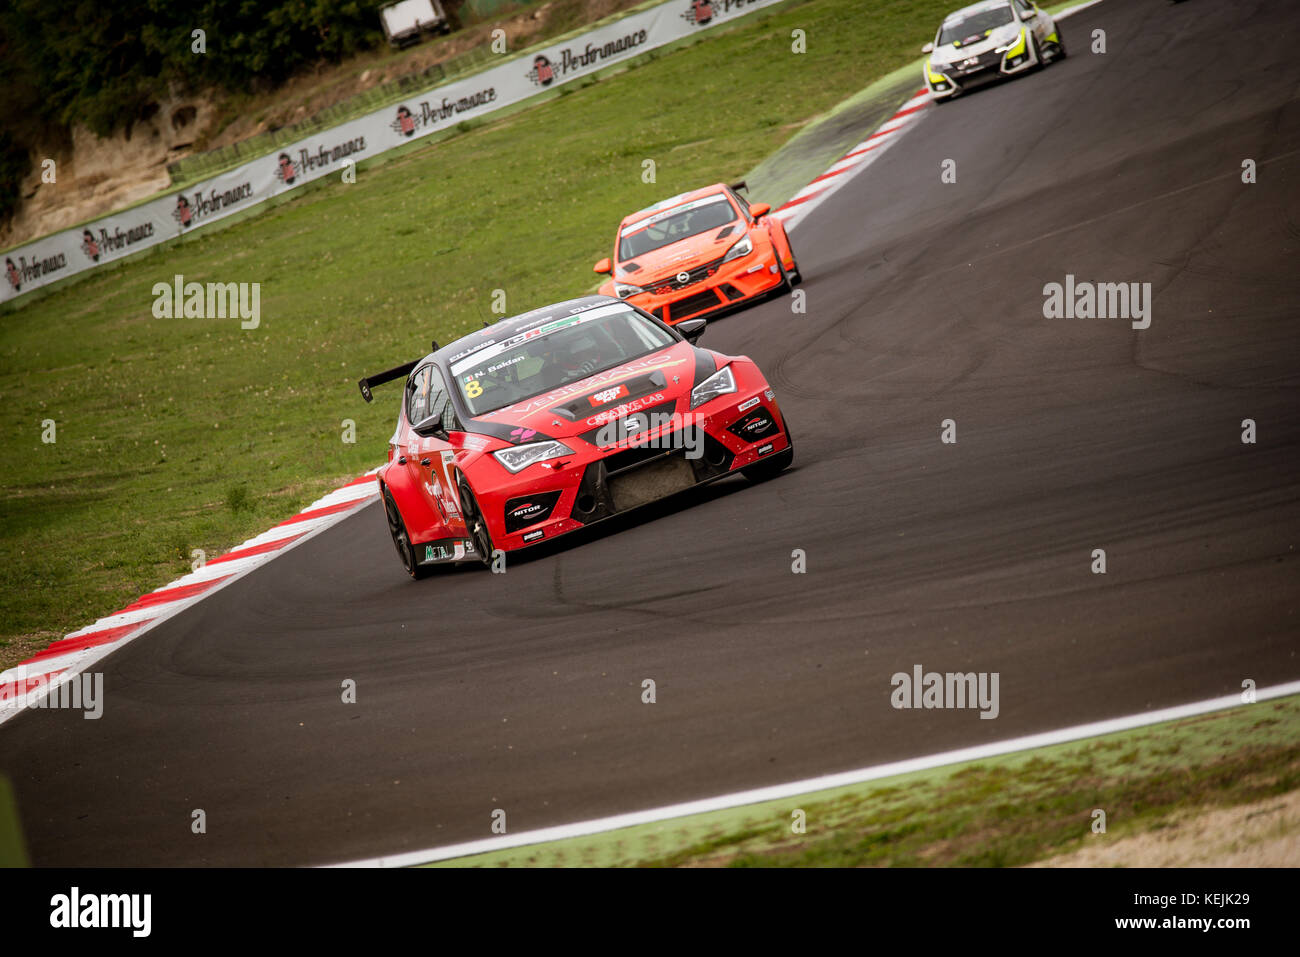 Vallelunga, Italy september 24 2017. Touring Seat Leon racing car in action on track with other cars in background during the race Stock Photo